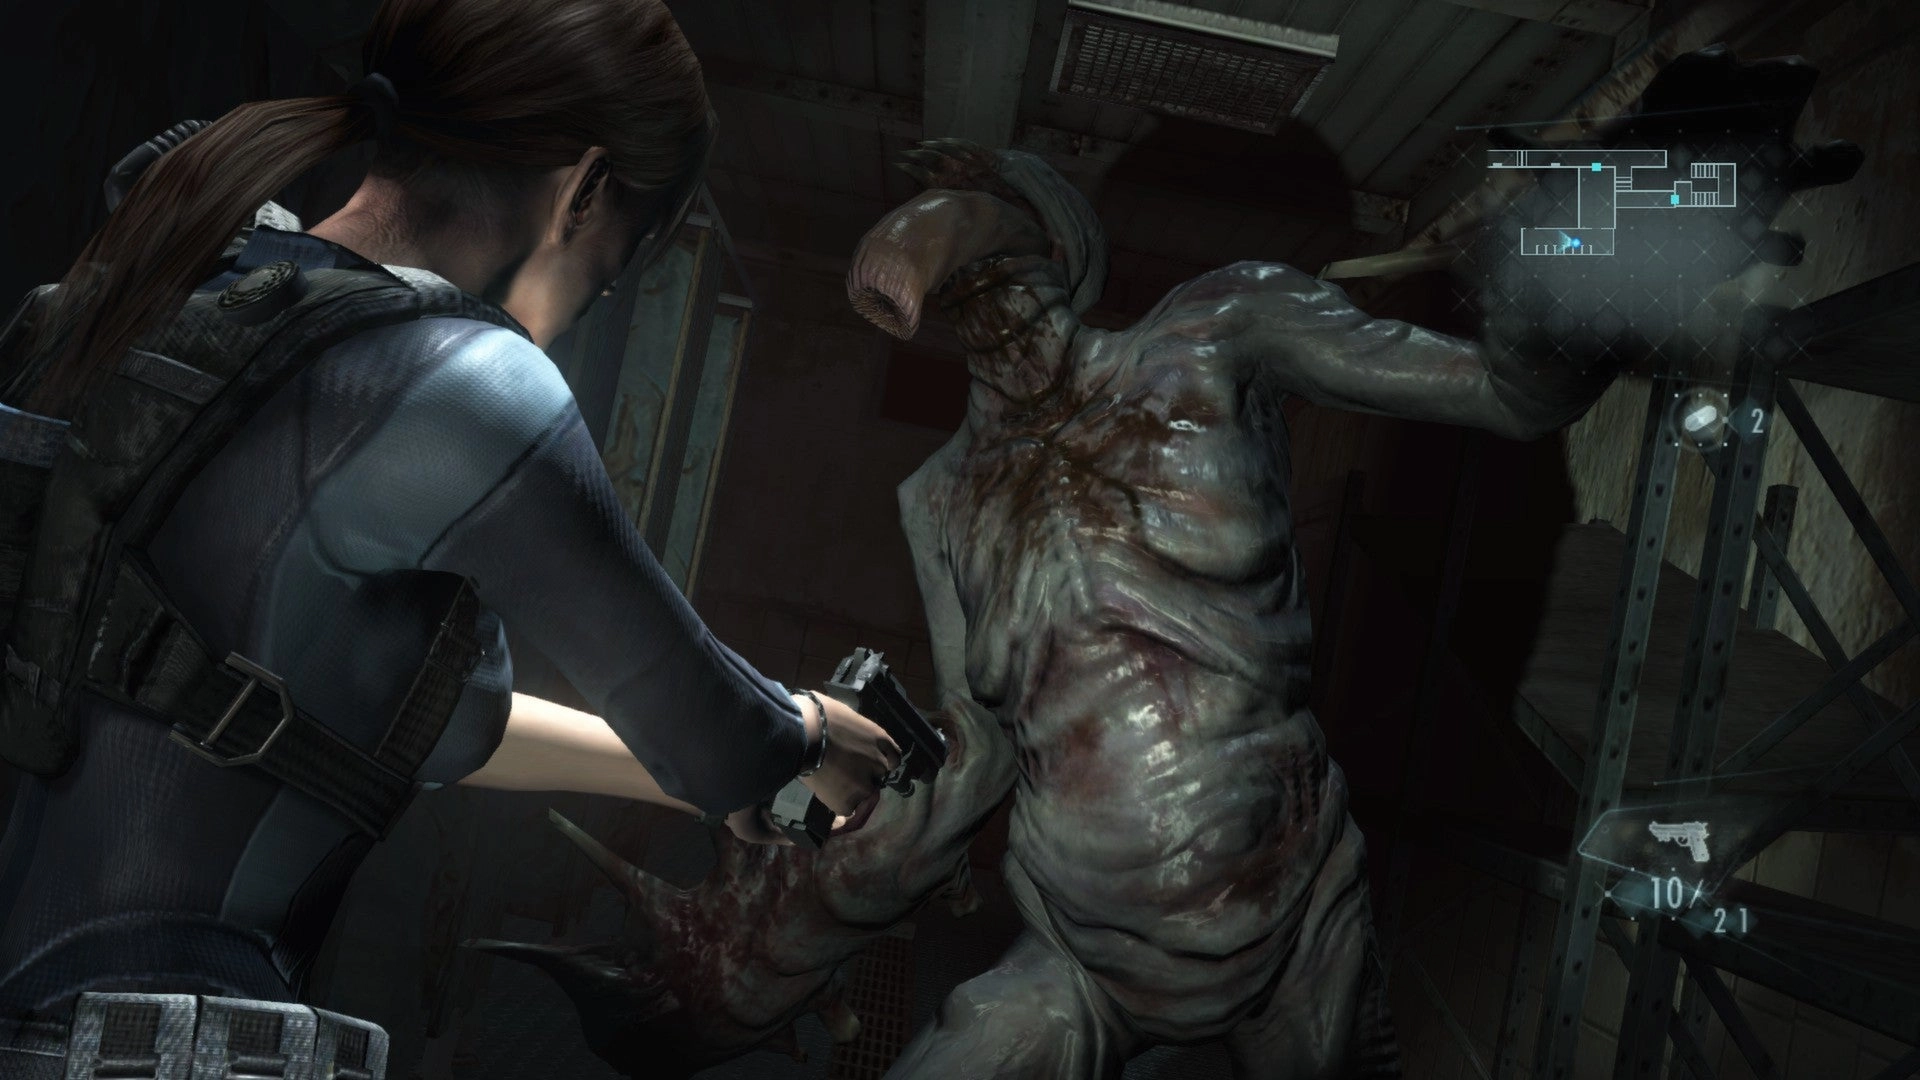 Capcom Adds DRM to Resident Evil Revelations, Backpedals